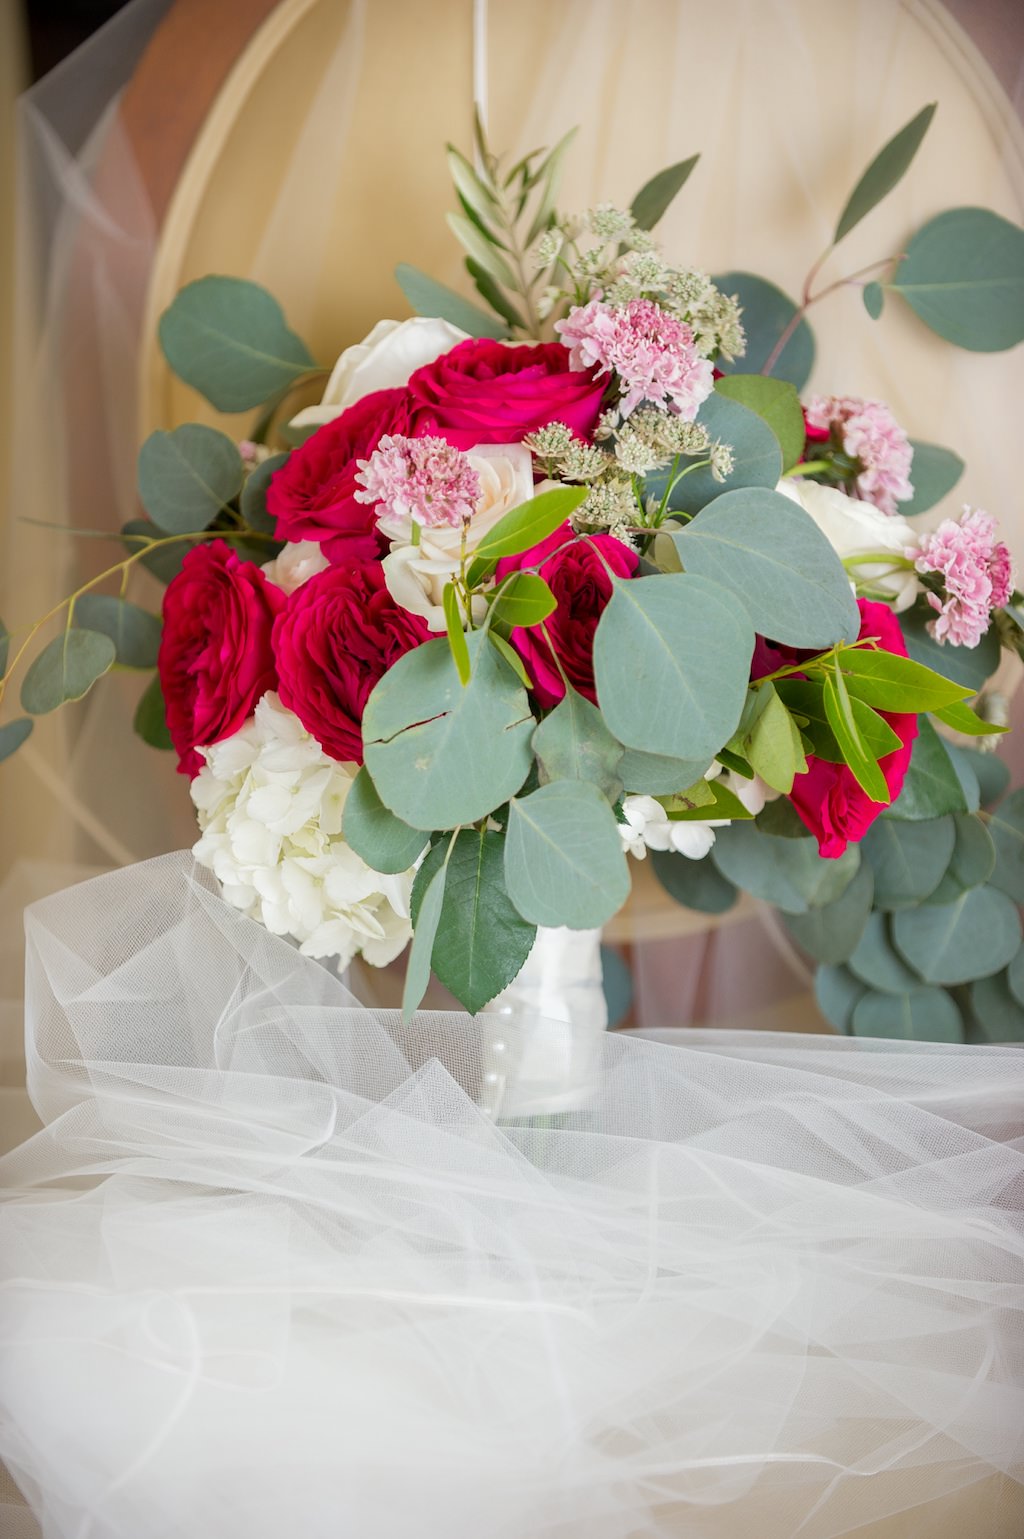 Red and White Rose with Pink Flower and Greenery Bridal Bouquet